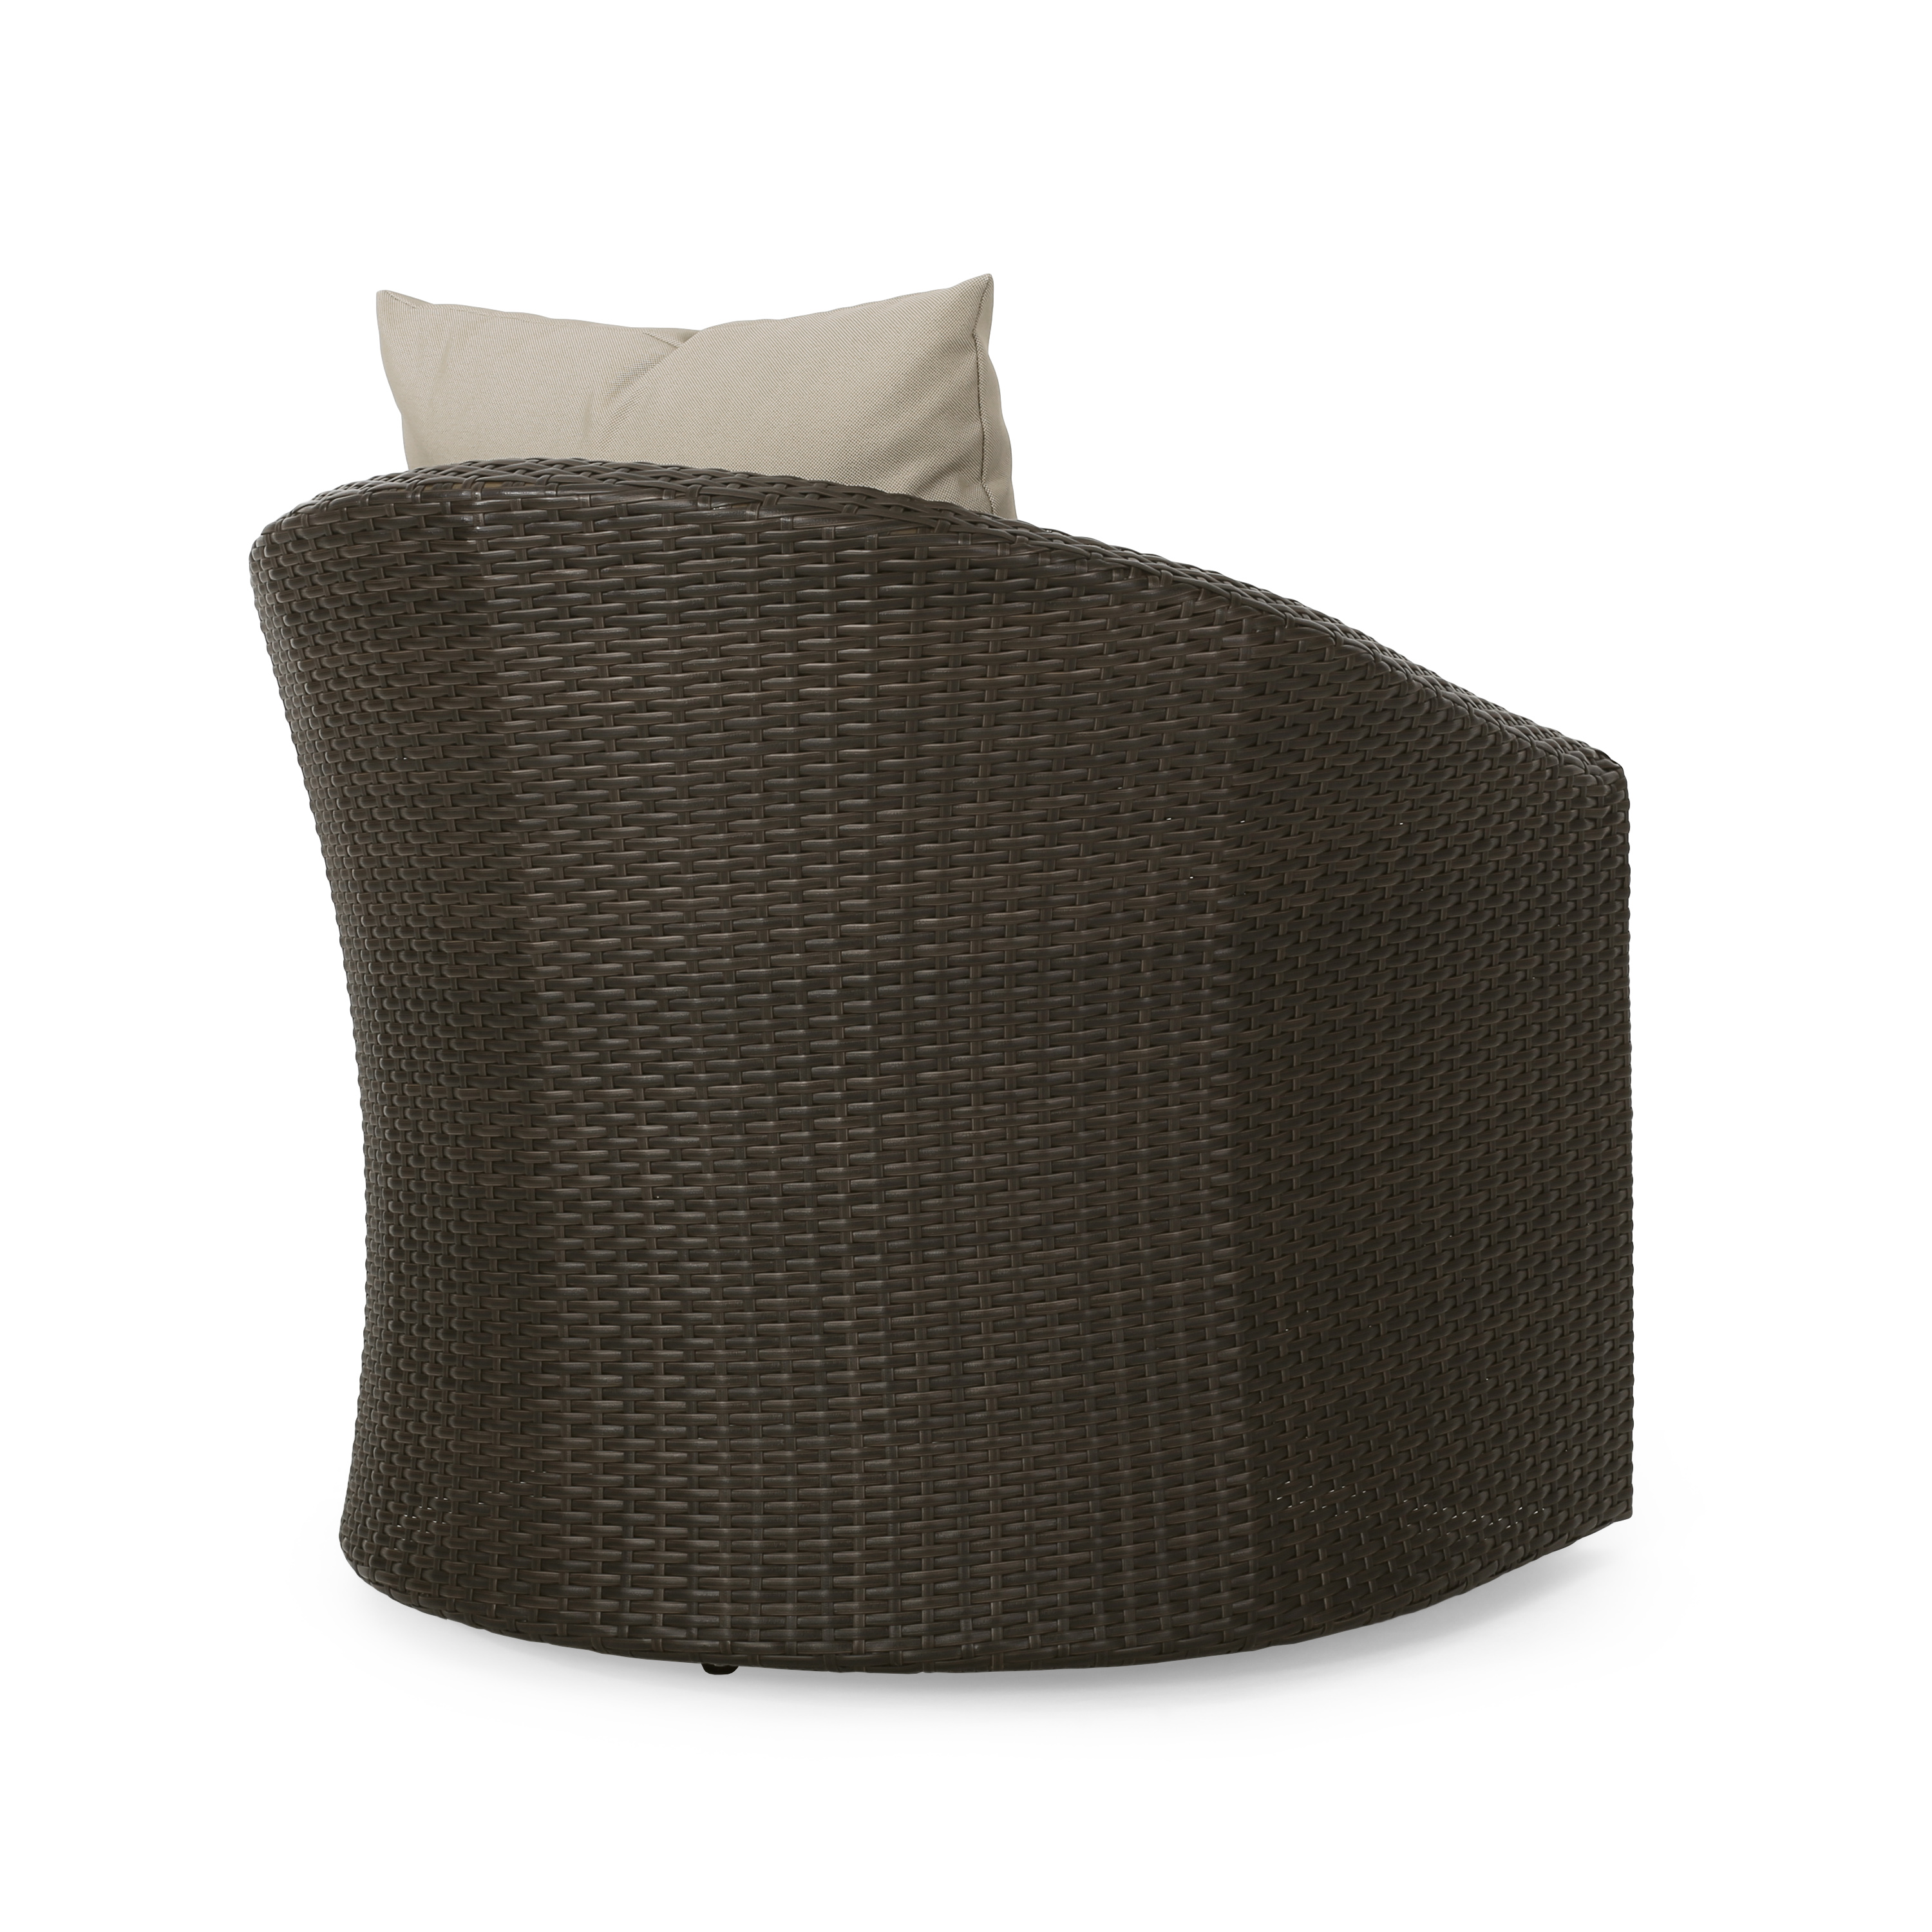 Dillard Outdoor Aluminum Framed Wicker Swivel Club Chair, Mixed Brown and Mixed Khaki - image 5 of 13